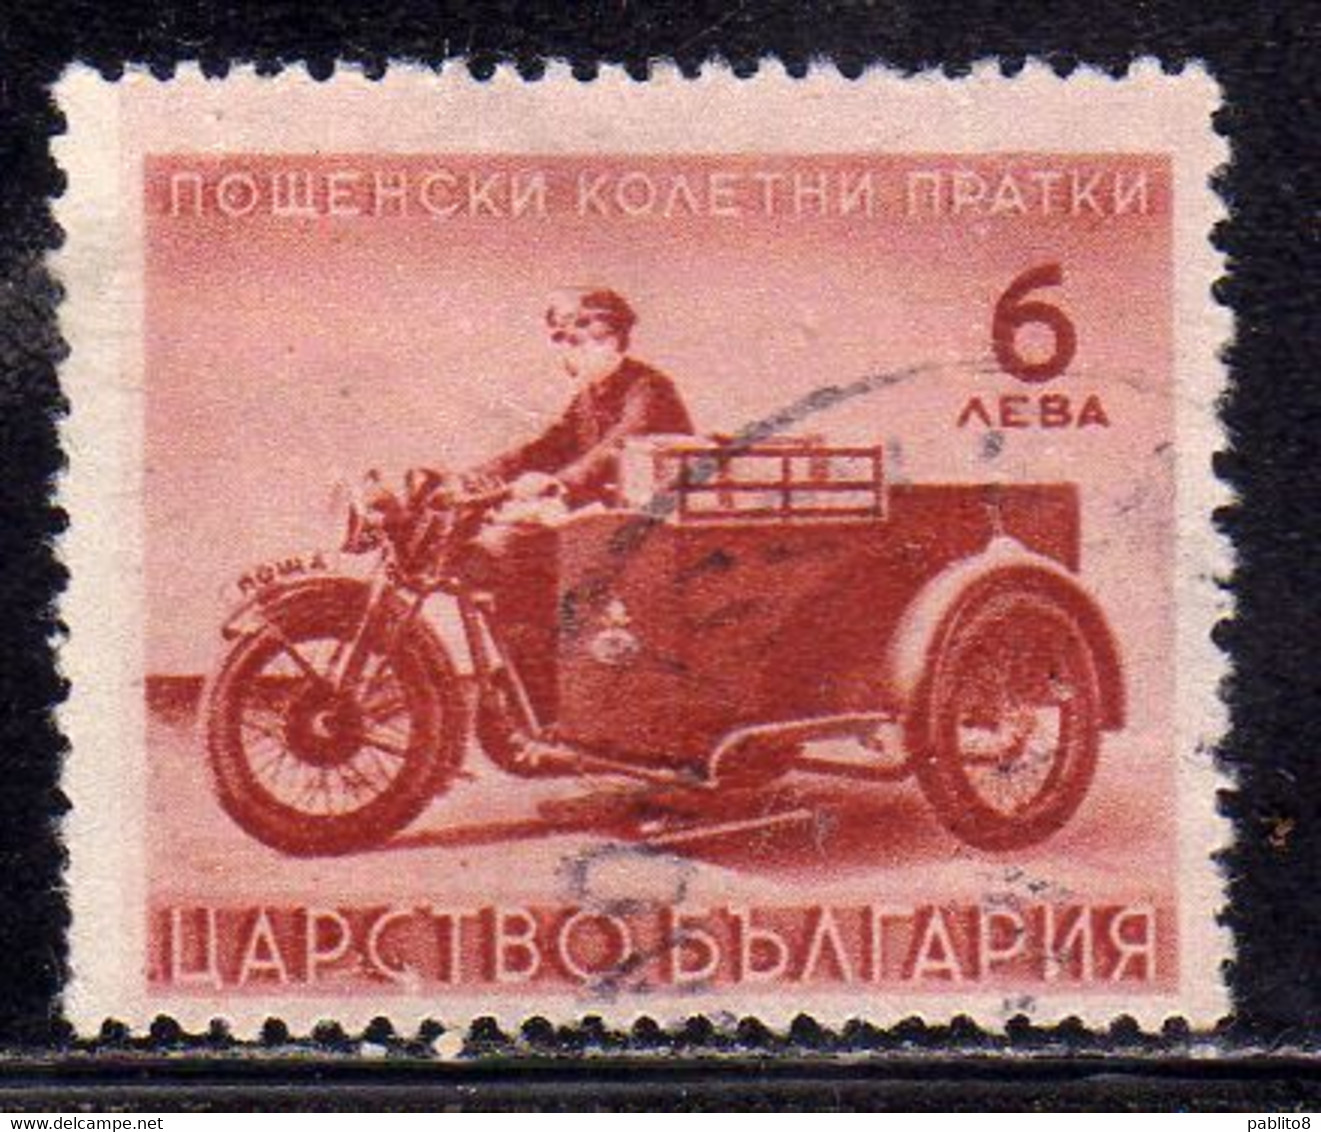 BULGARIA BULGARIE BULGARIEN 1942 PARCEL POST STAMPS PACCHI POSTALI MOTORCYCLE 6L USATO USED OBLITERE' - Official Stamps